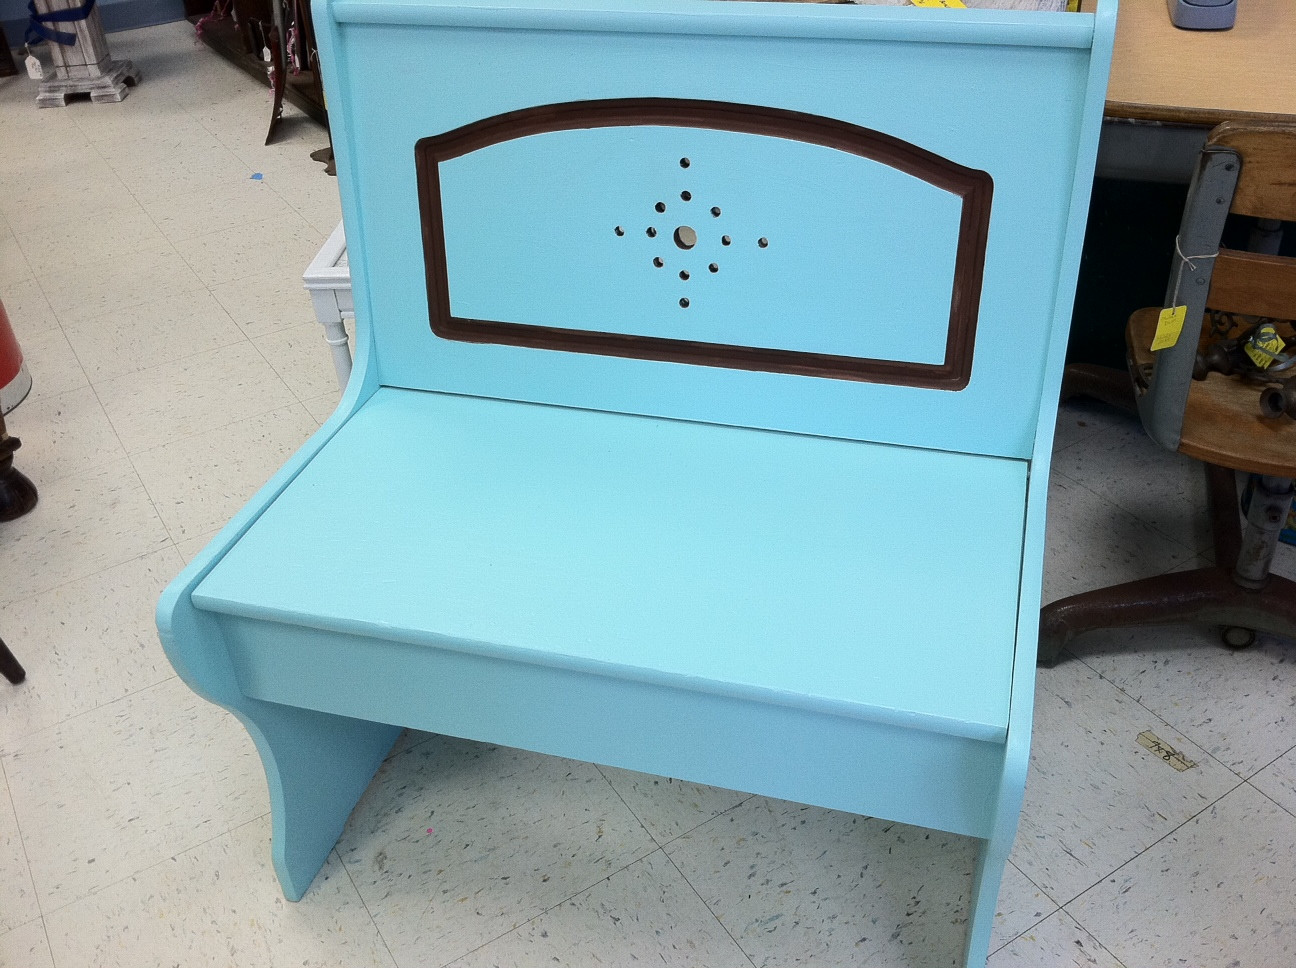 Turquoise Bench With Storage
 New Item Turquoise & Brown Storage Bench Among Other